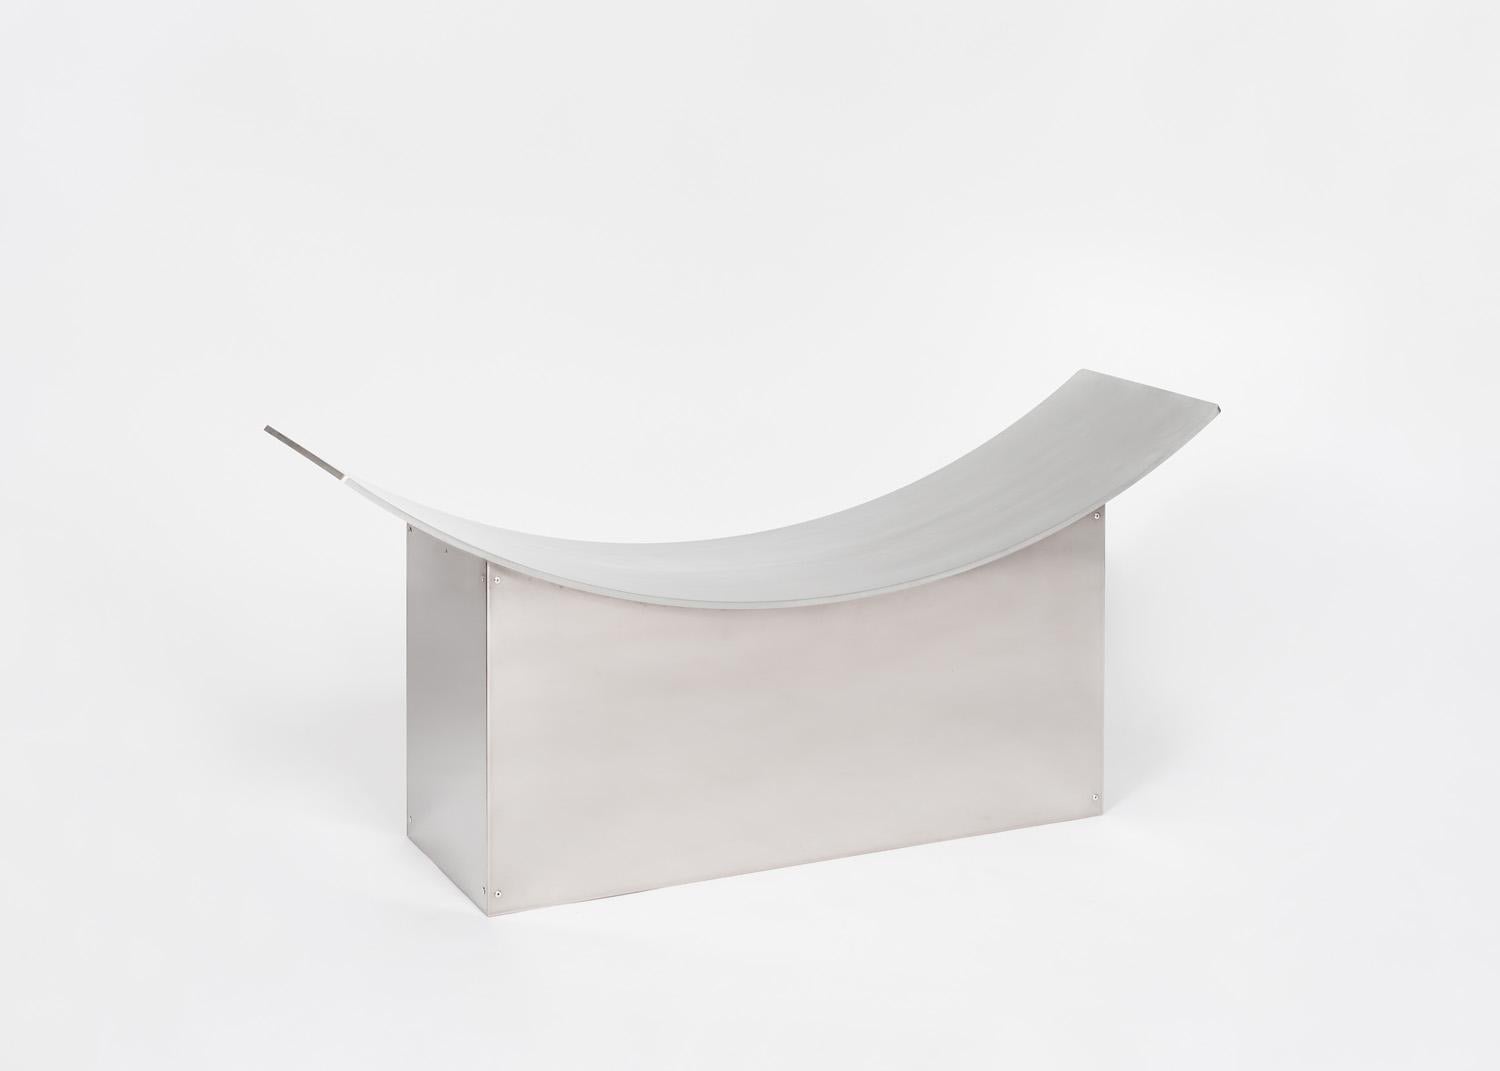 The Love Seat by ELIAS VAN ORSHAEGEN is an idea that came alive during the lockdown. A bench which makes us sit closer to each other. A curved aluminium plate of one meter fifty, symbolising the social distance, poetically brings the users closer